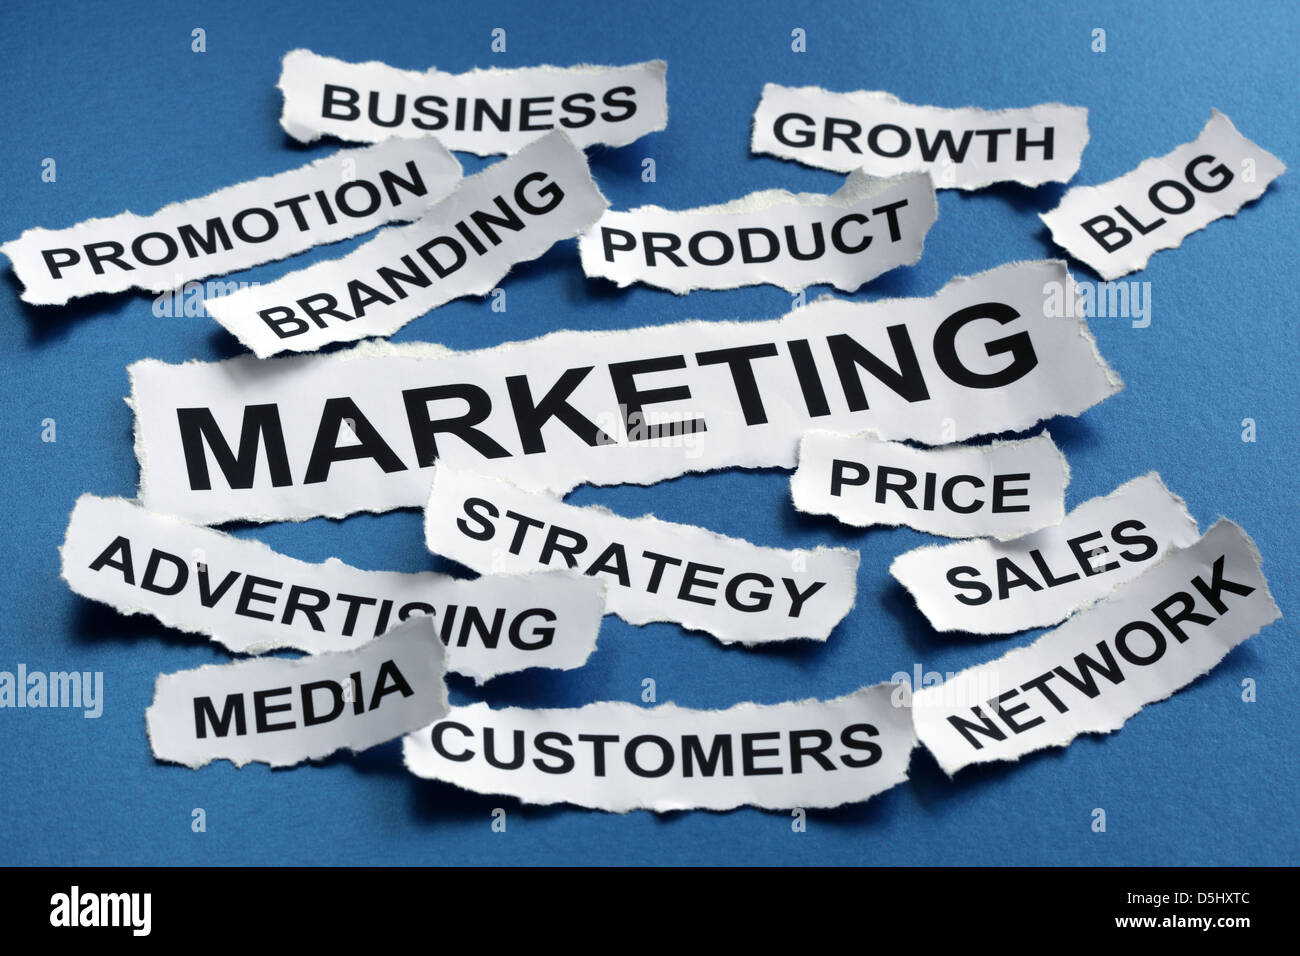 Marketing and strategy concept Stock Photo